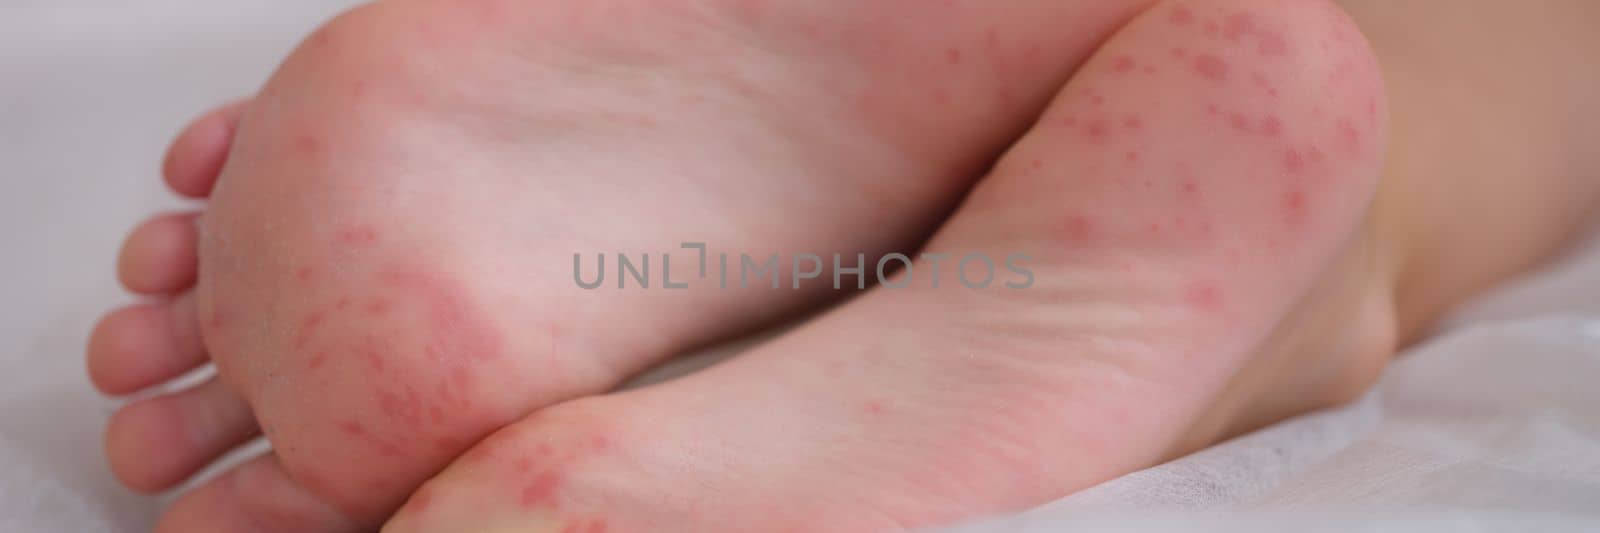 Children foot with dermatitis allergic rash. Closeup of child foot and toes with red rash and coxsackievirus enterovirus